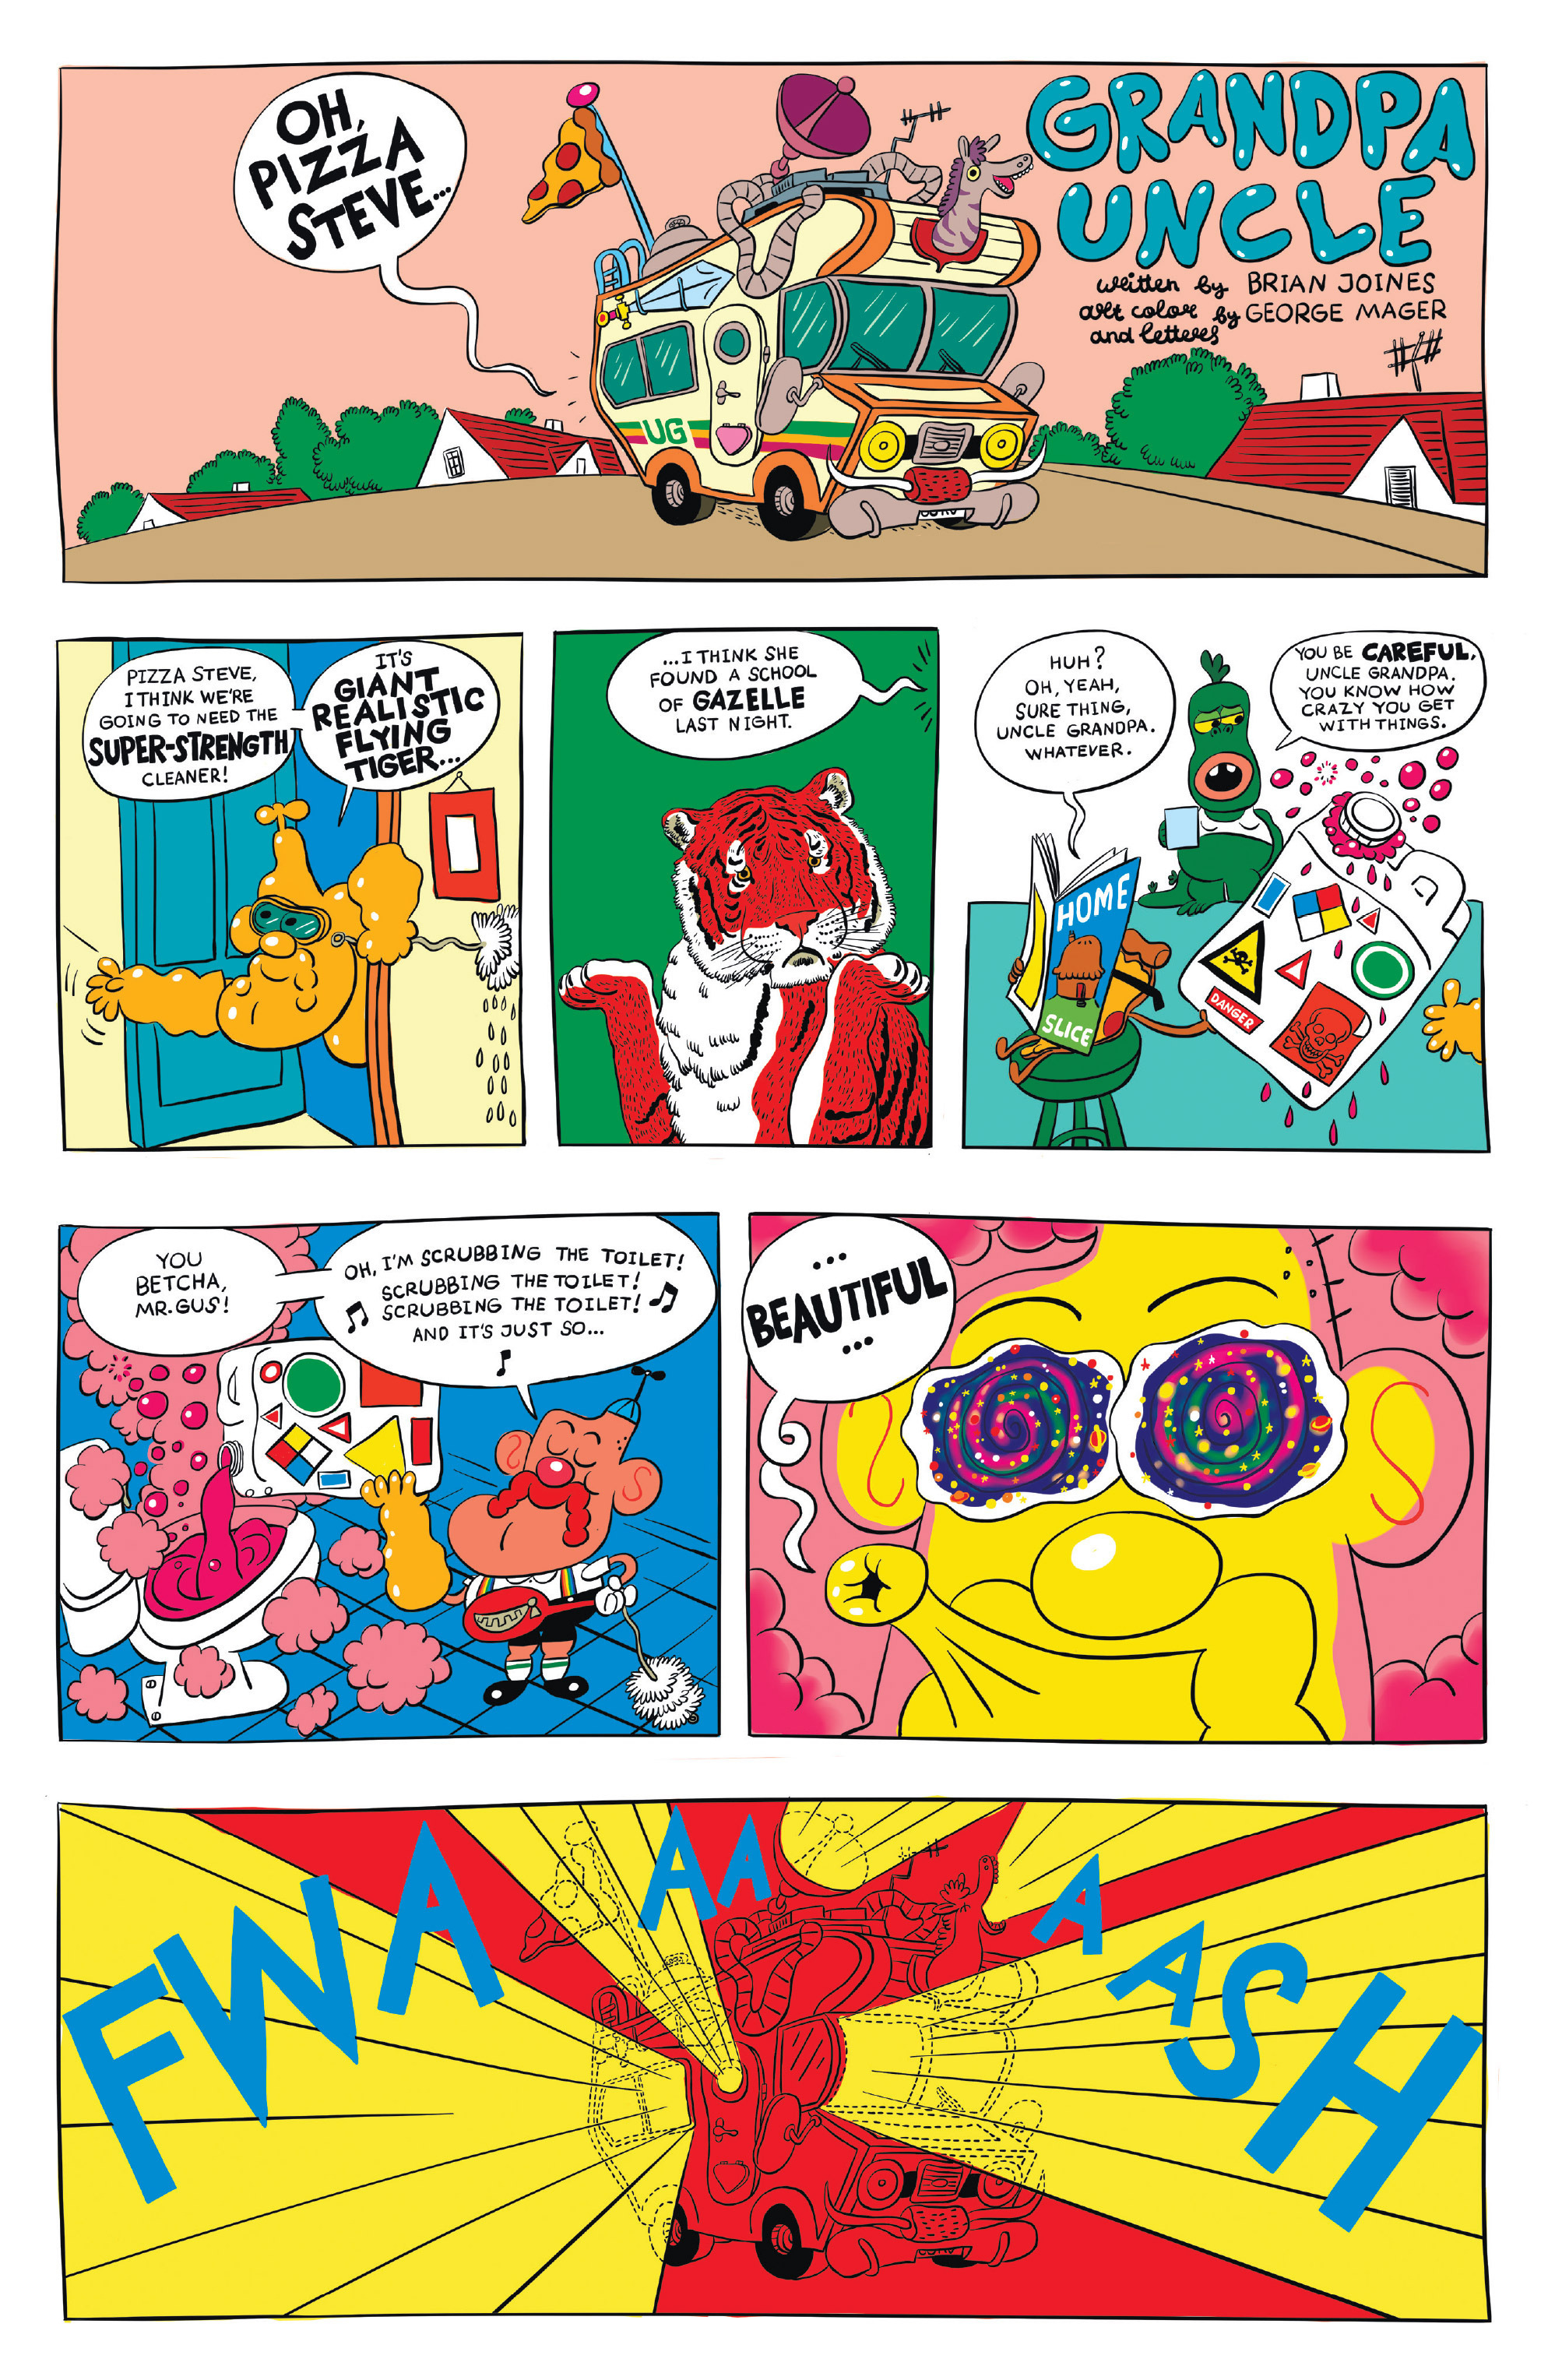 Read online Uncle Grandpa: Pizza Steve Special comic -  Issue # Full - 6